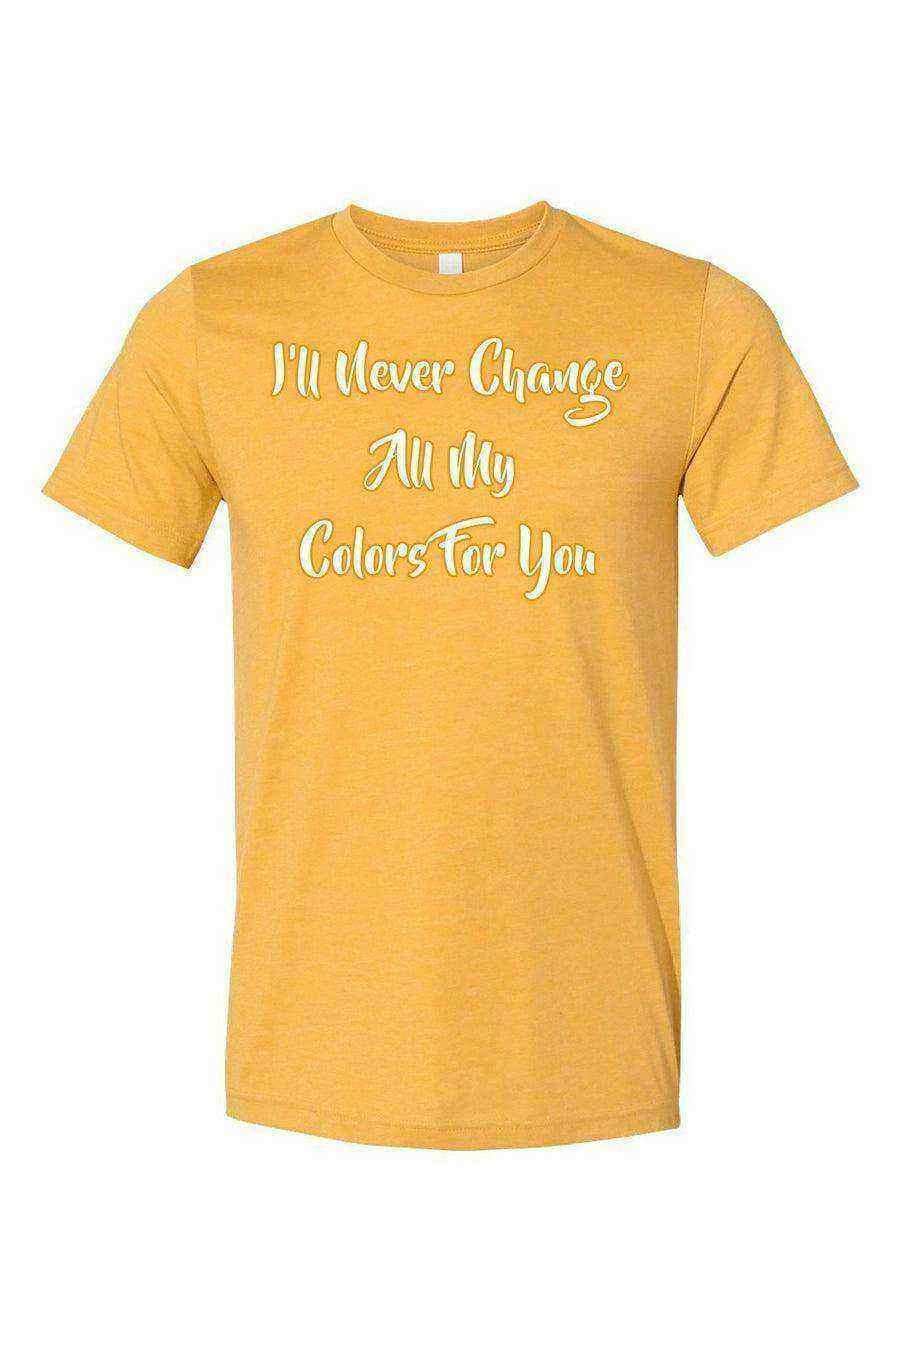 I’ll Never Change All My Colors For You Shirt | The Bodyguard Shirt - Dylan's Tees